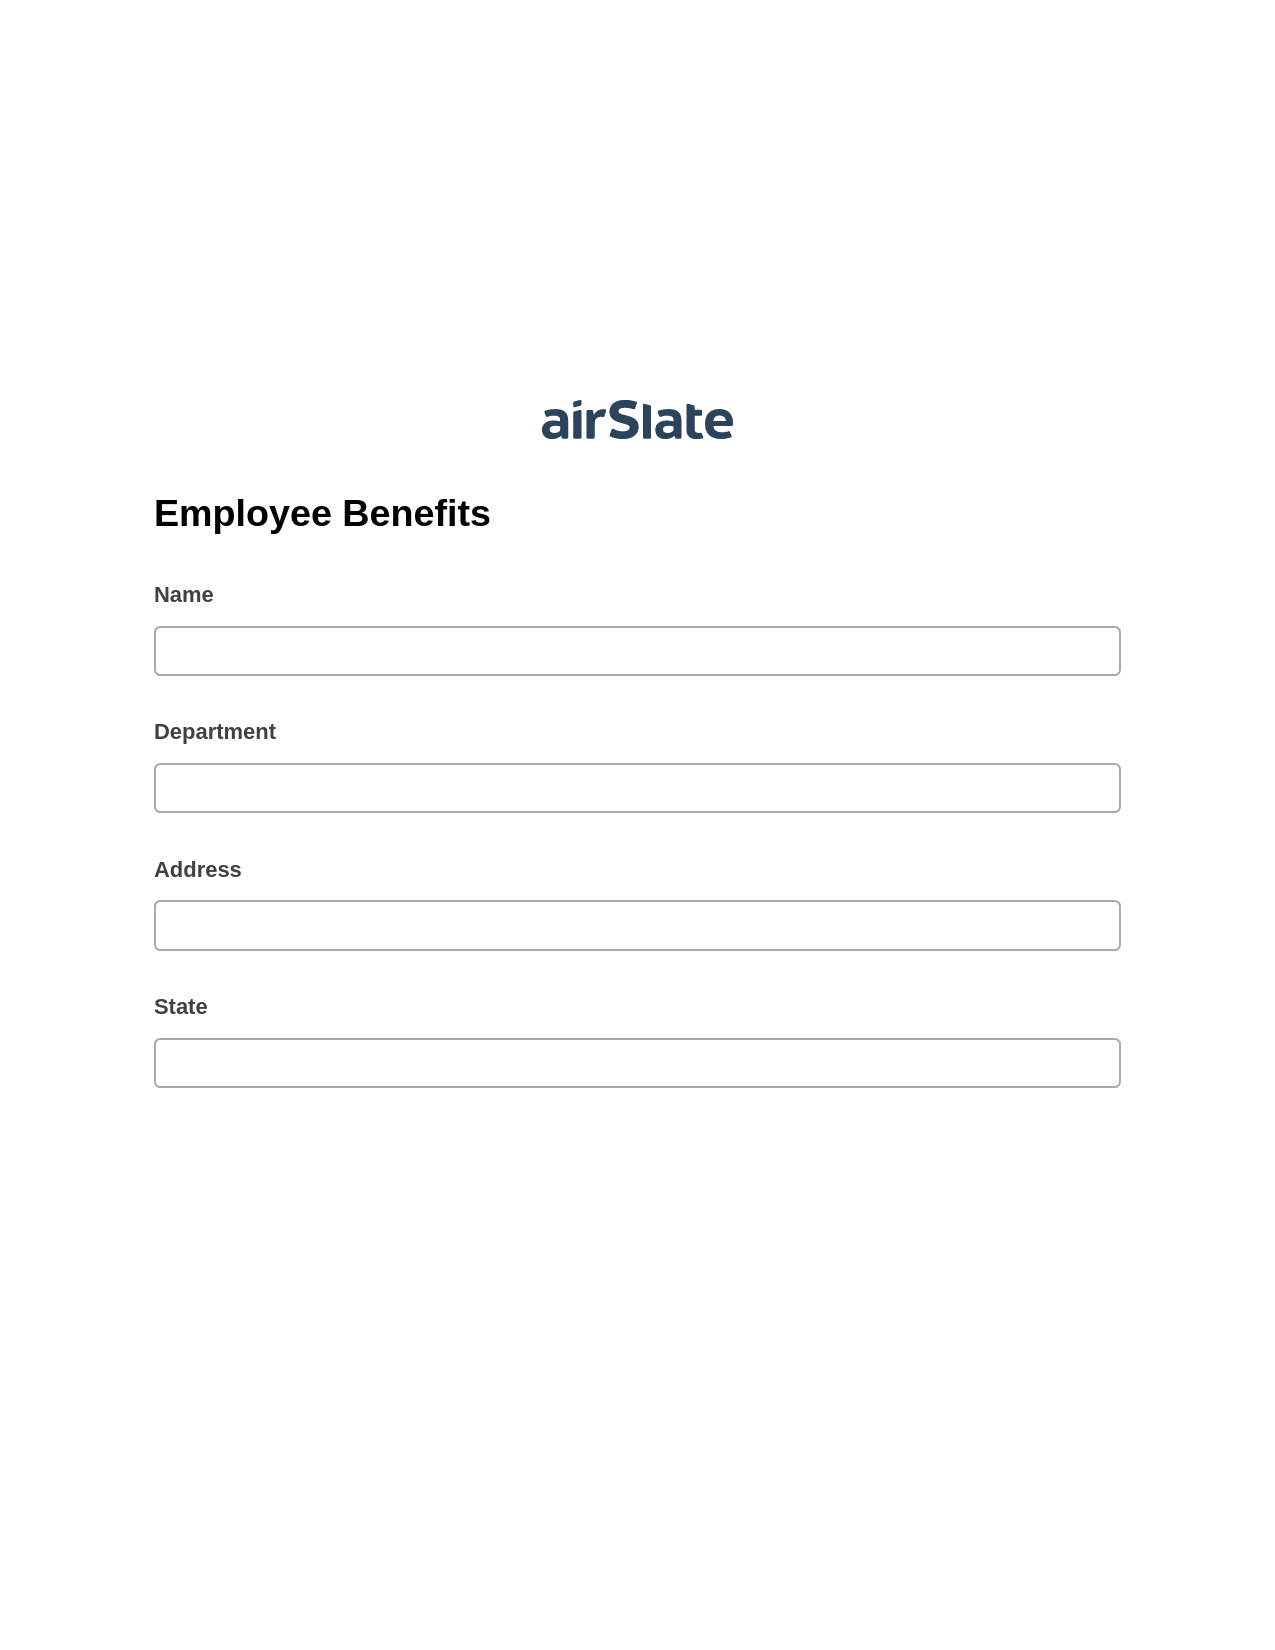 Employee Benefits Pre-fill from another Slate Bot, Create NetSuite Records Bot, Export to Smartsheet